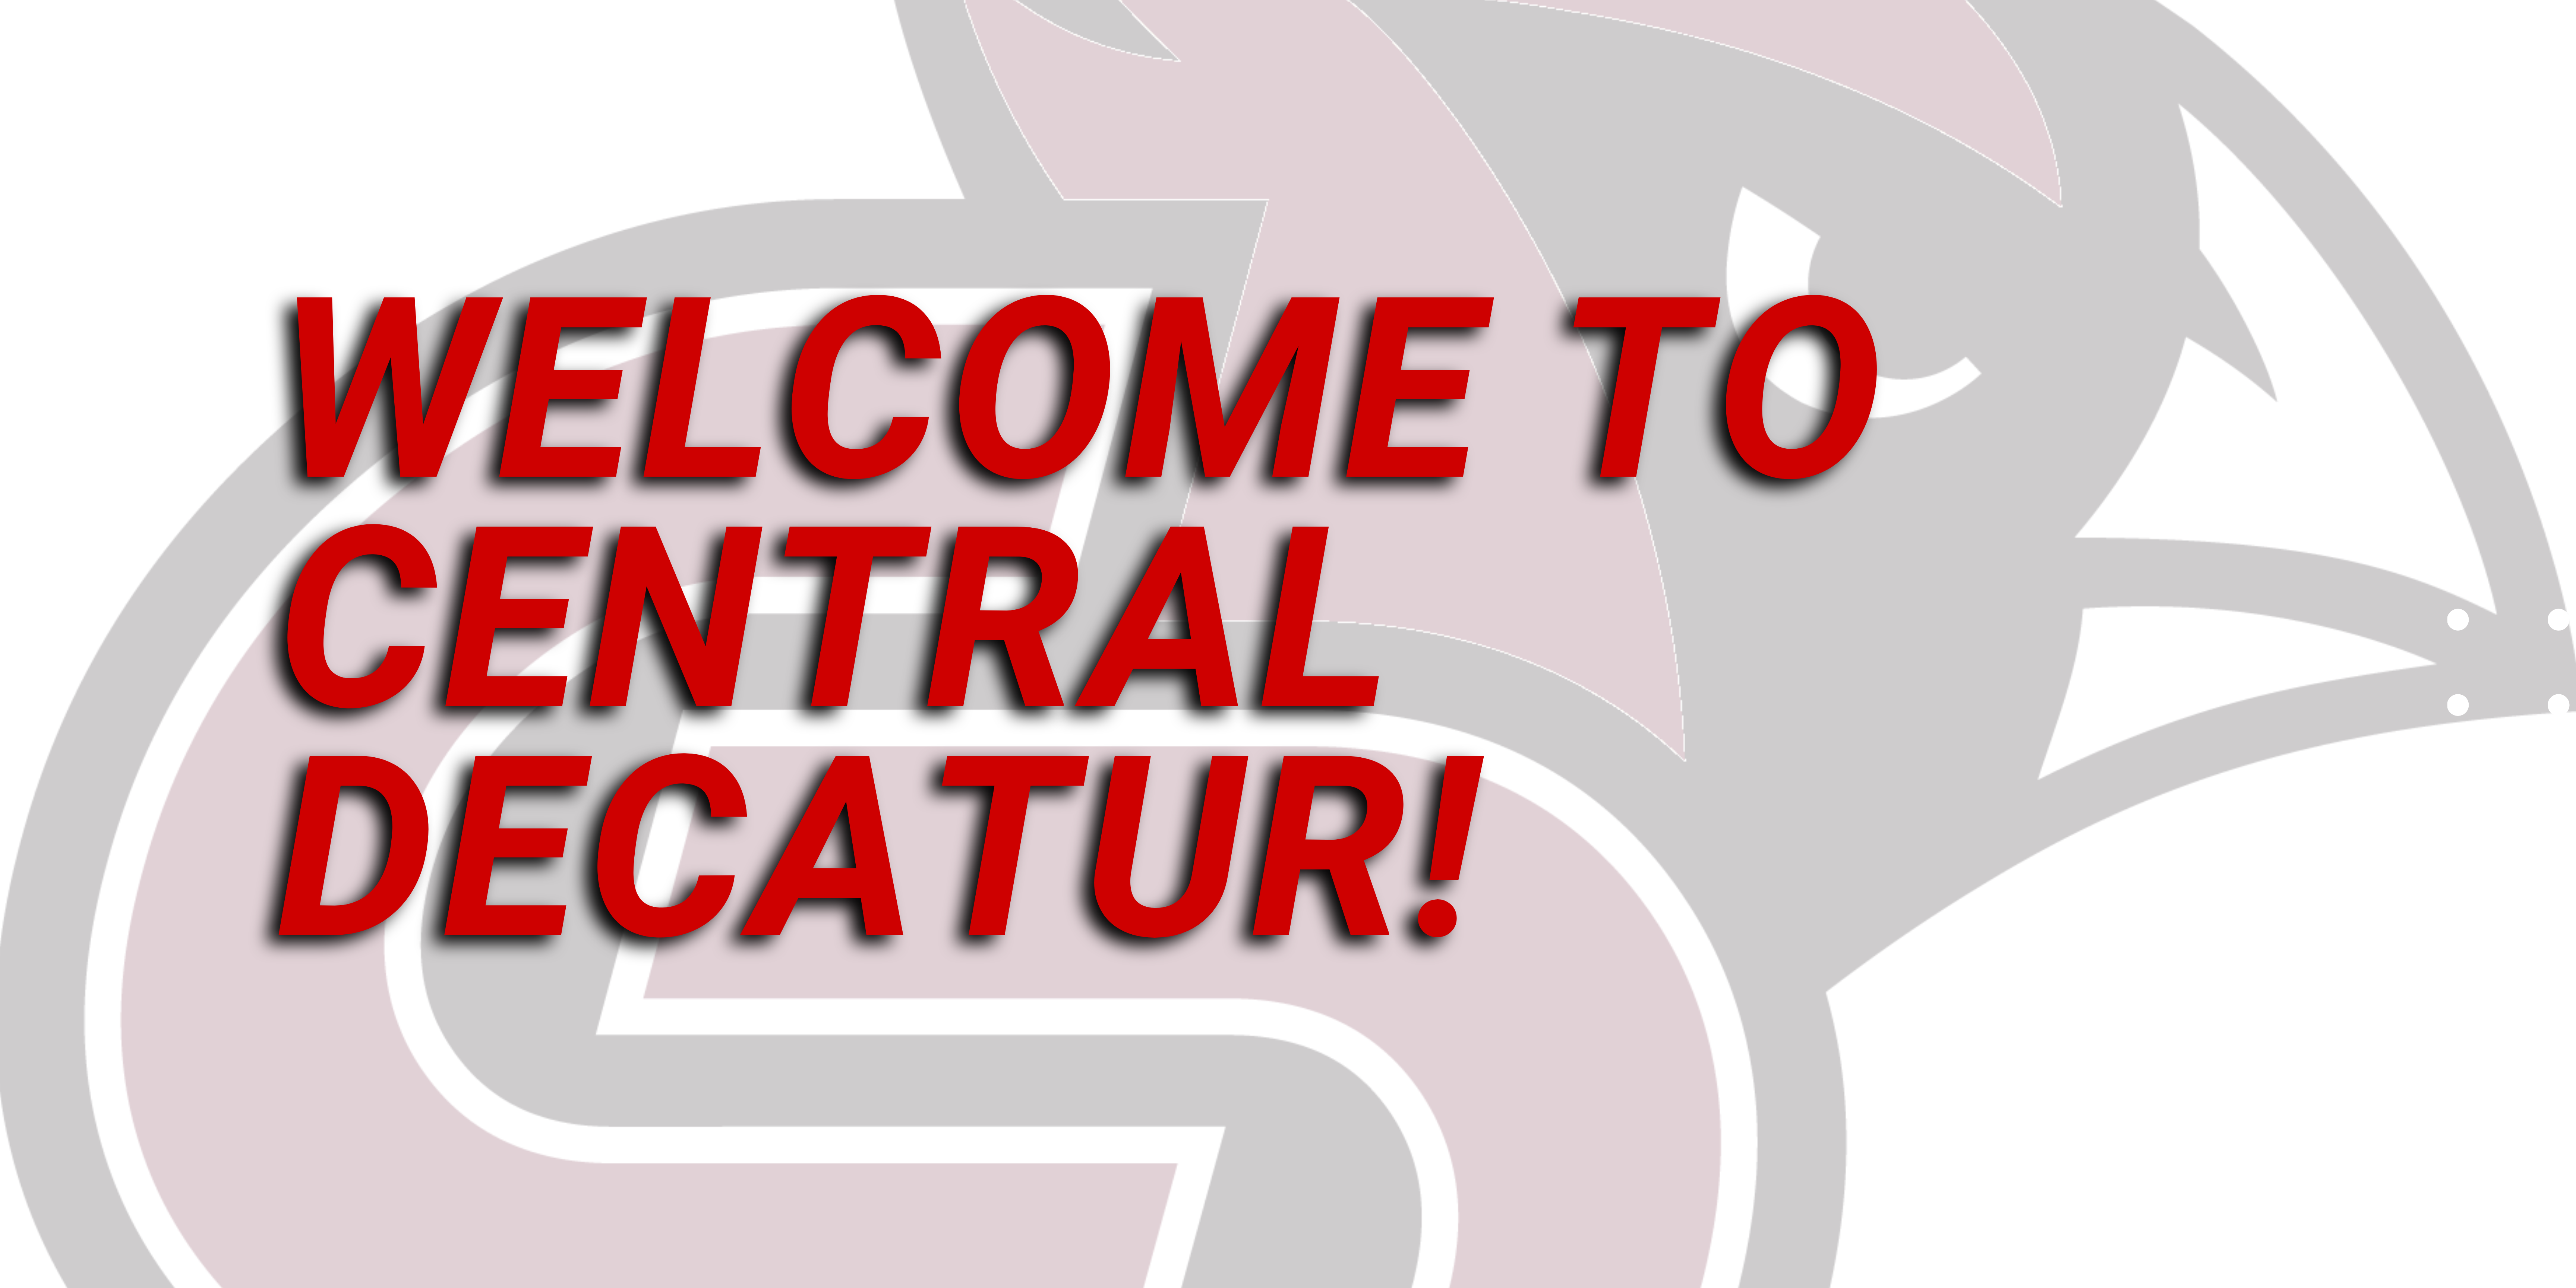 Welcome to Central Decatur! (1)